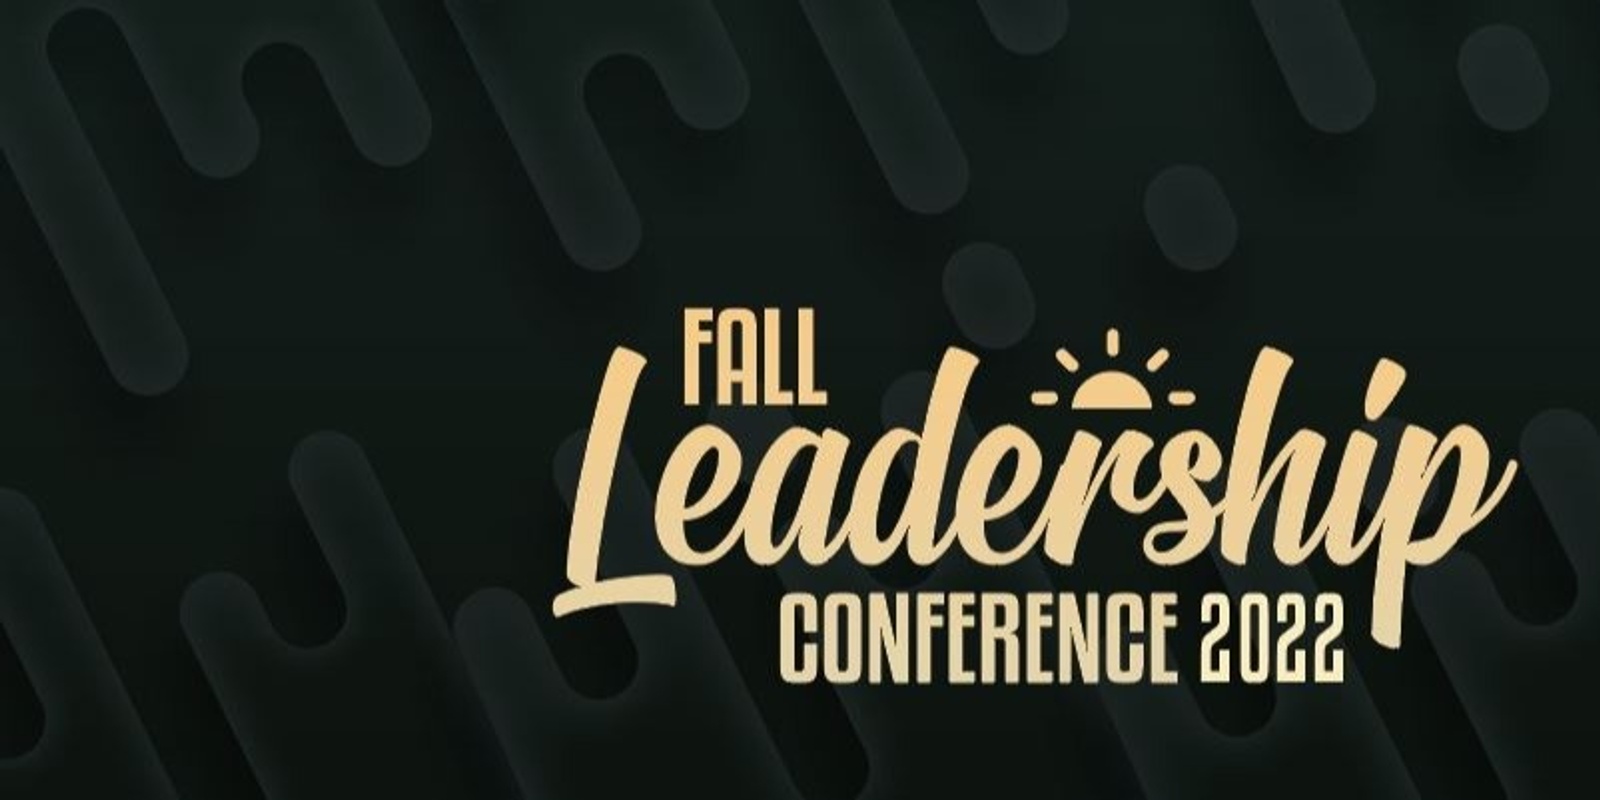 Banner image for Fall Leadership Conference